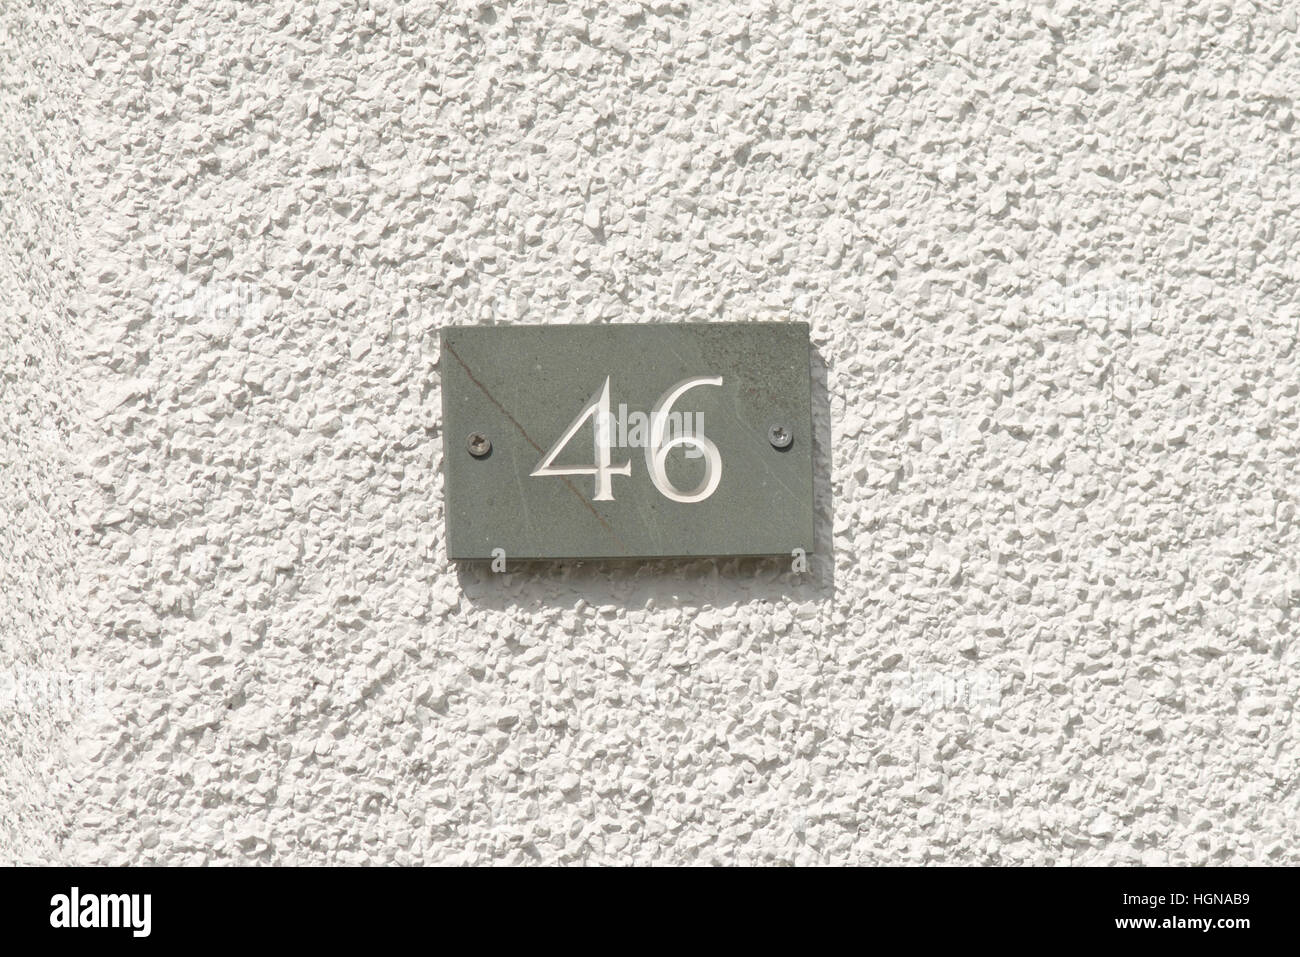 House Number 46 sign on wall painted white Stock Photo